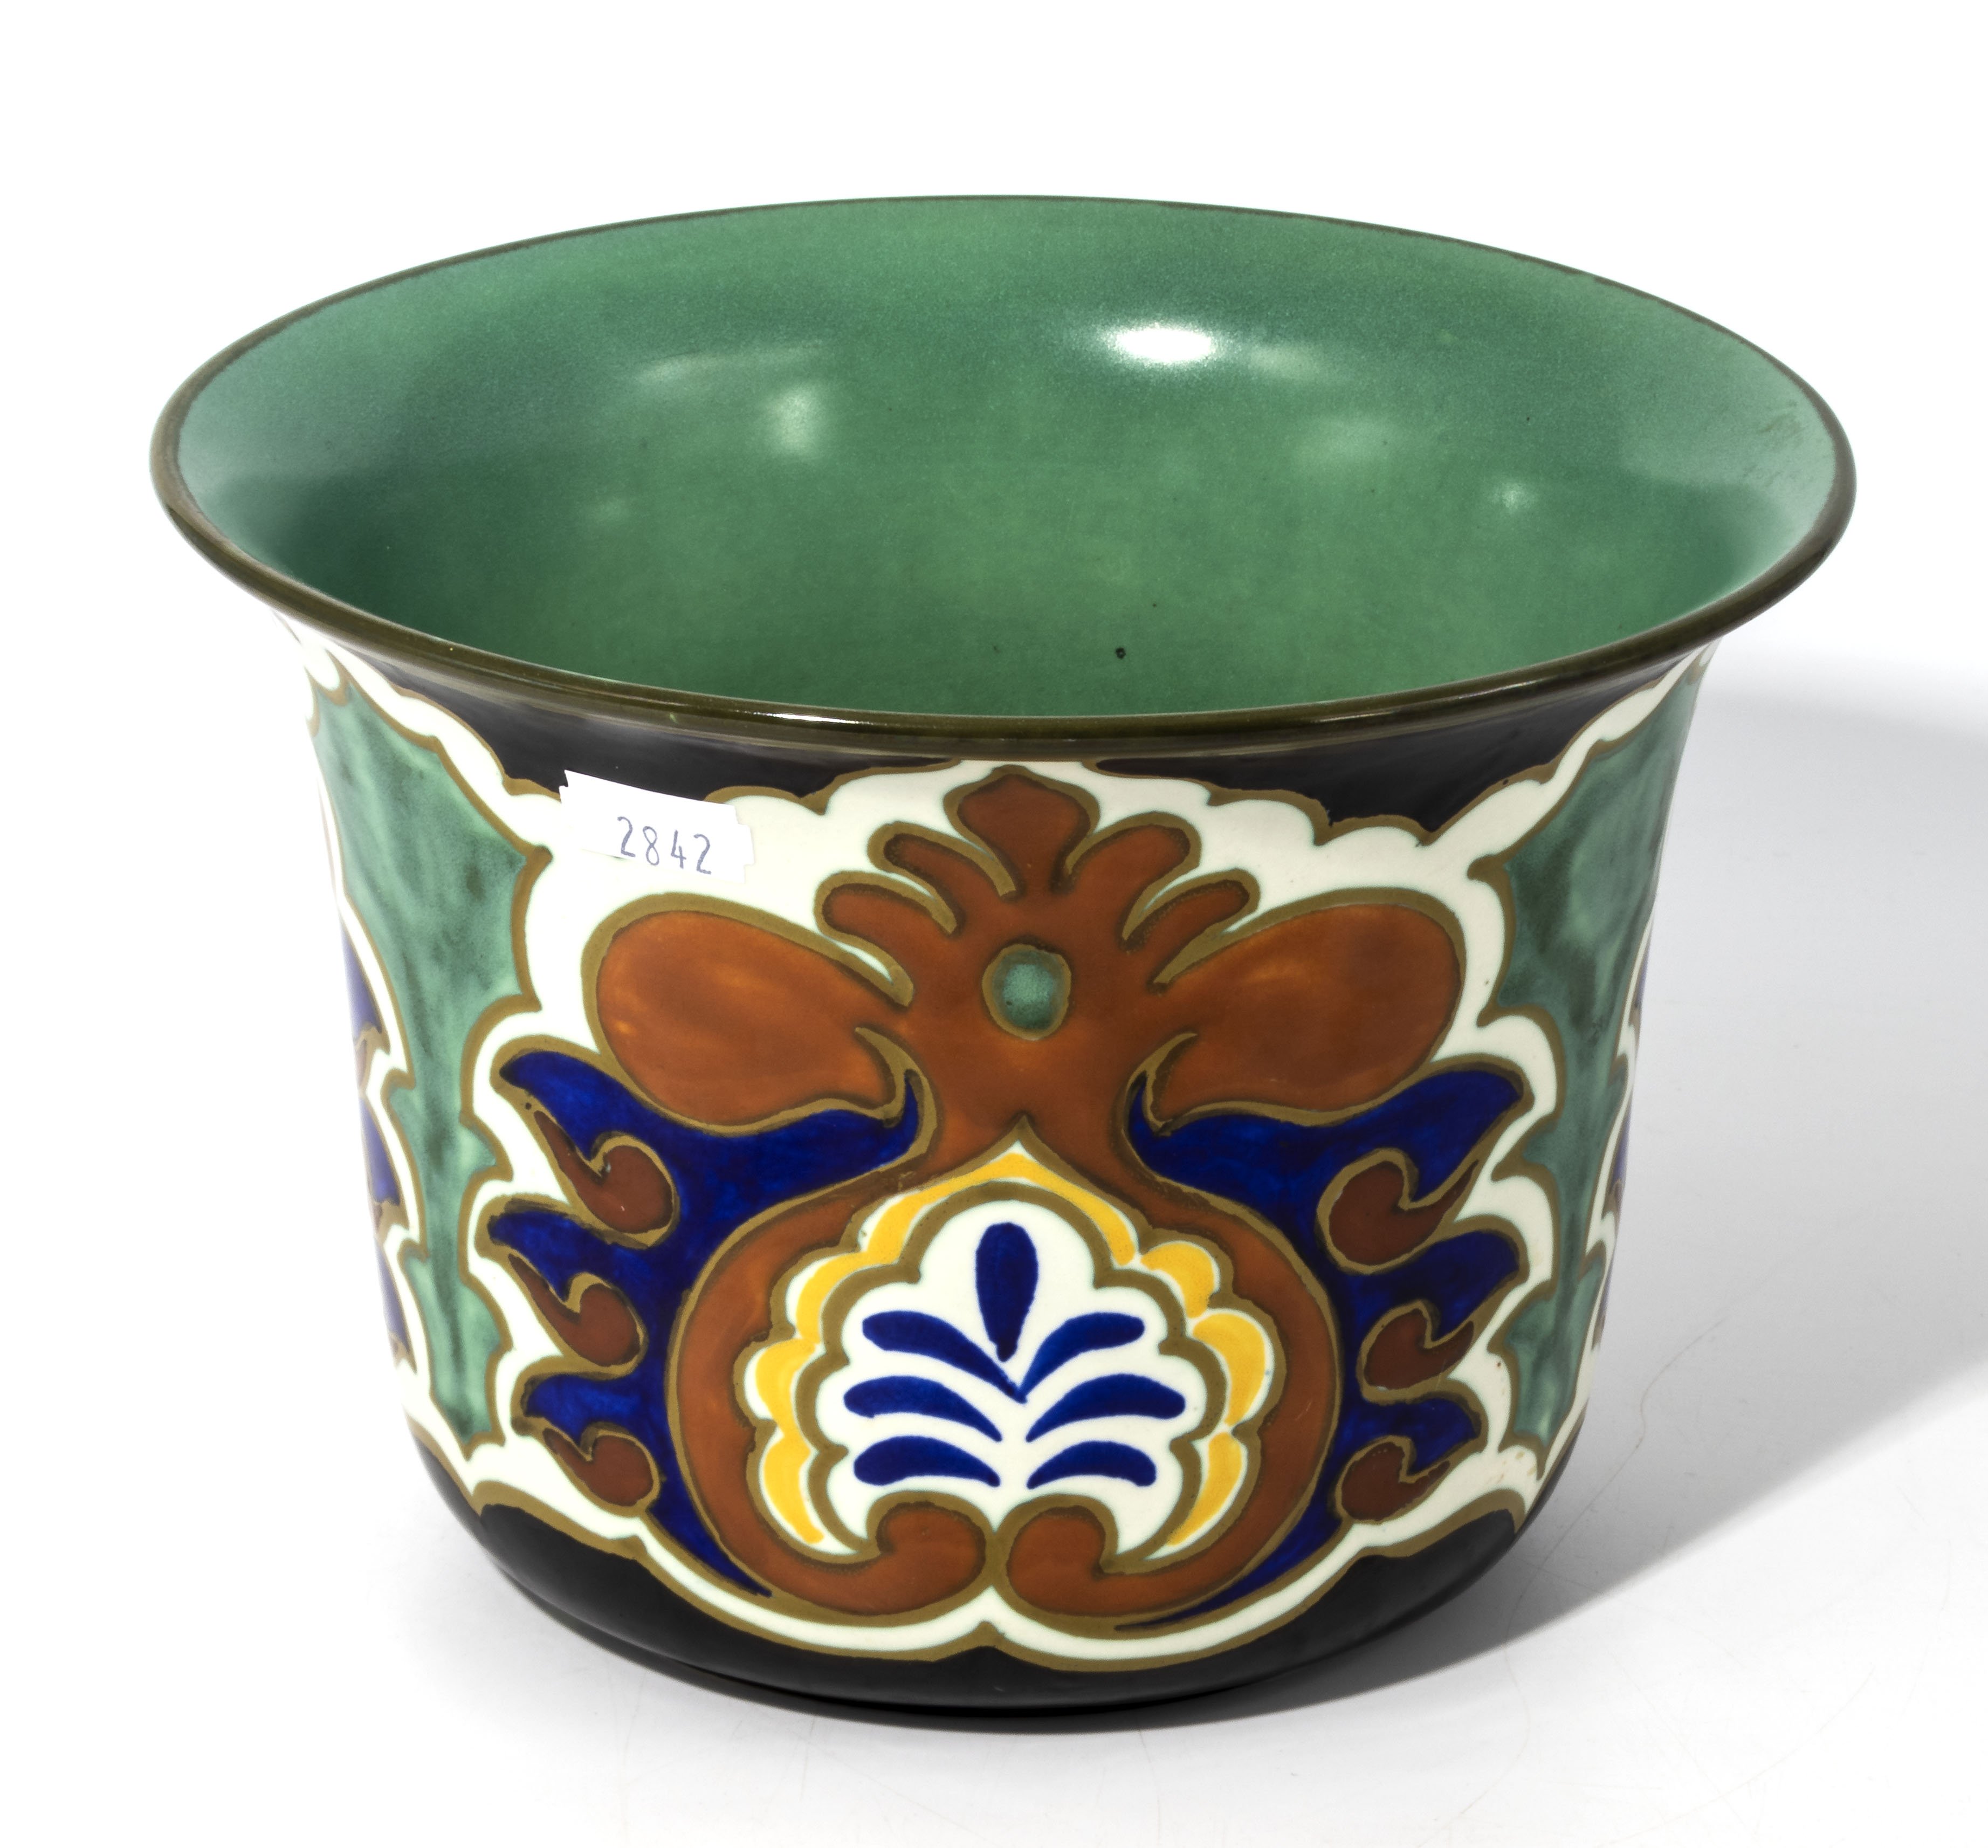 Gouda art pottery decorated vase circa 1920/30s, with a turquoise glazed interior, with floral - Image 3 of 13